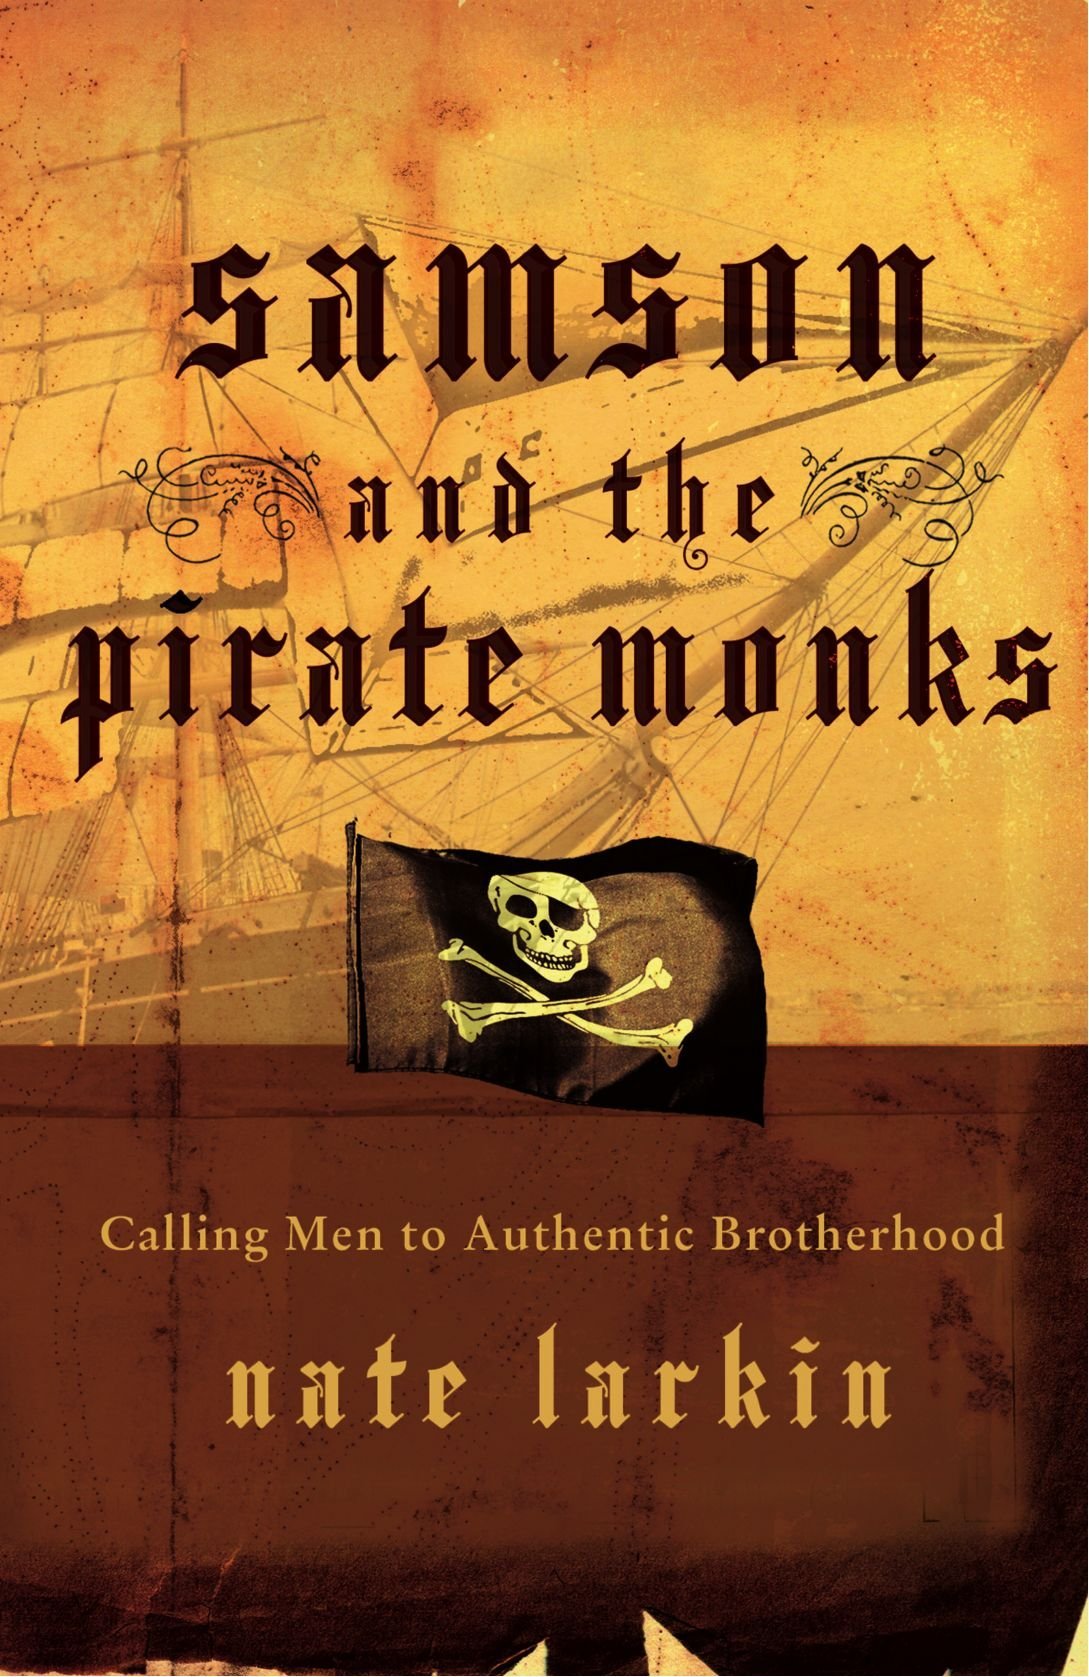 Samson and the Pirate Monks: Calling Men to Authentic Brotherhood